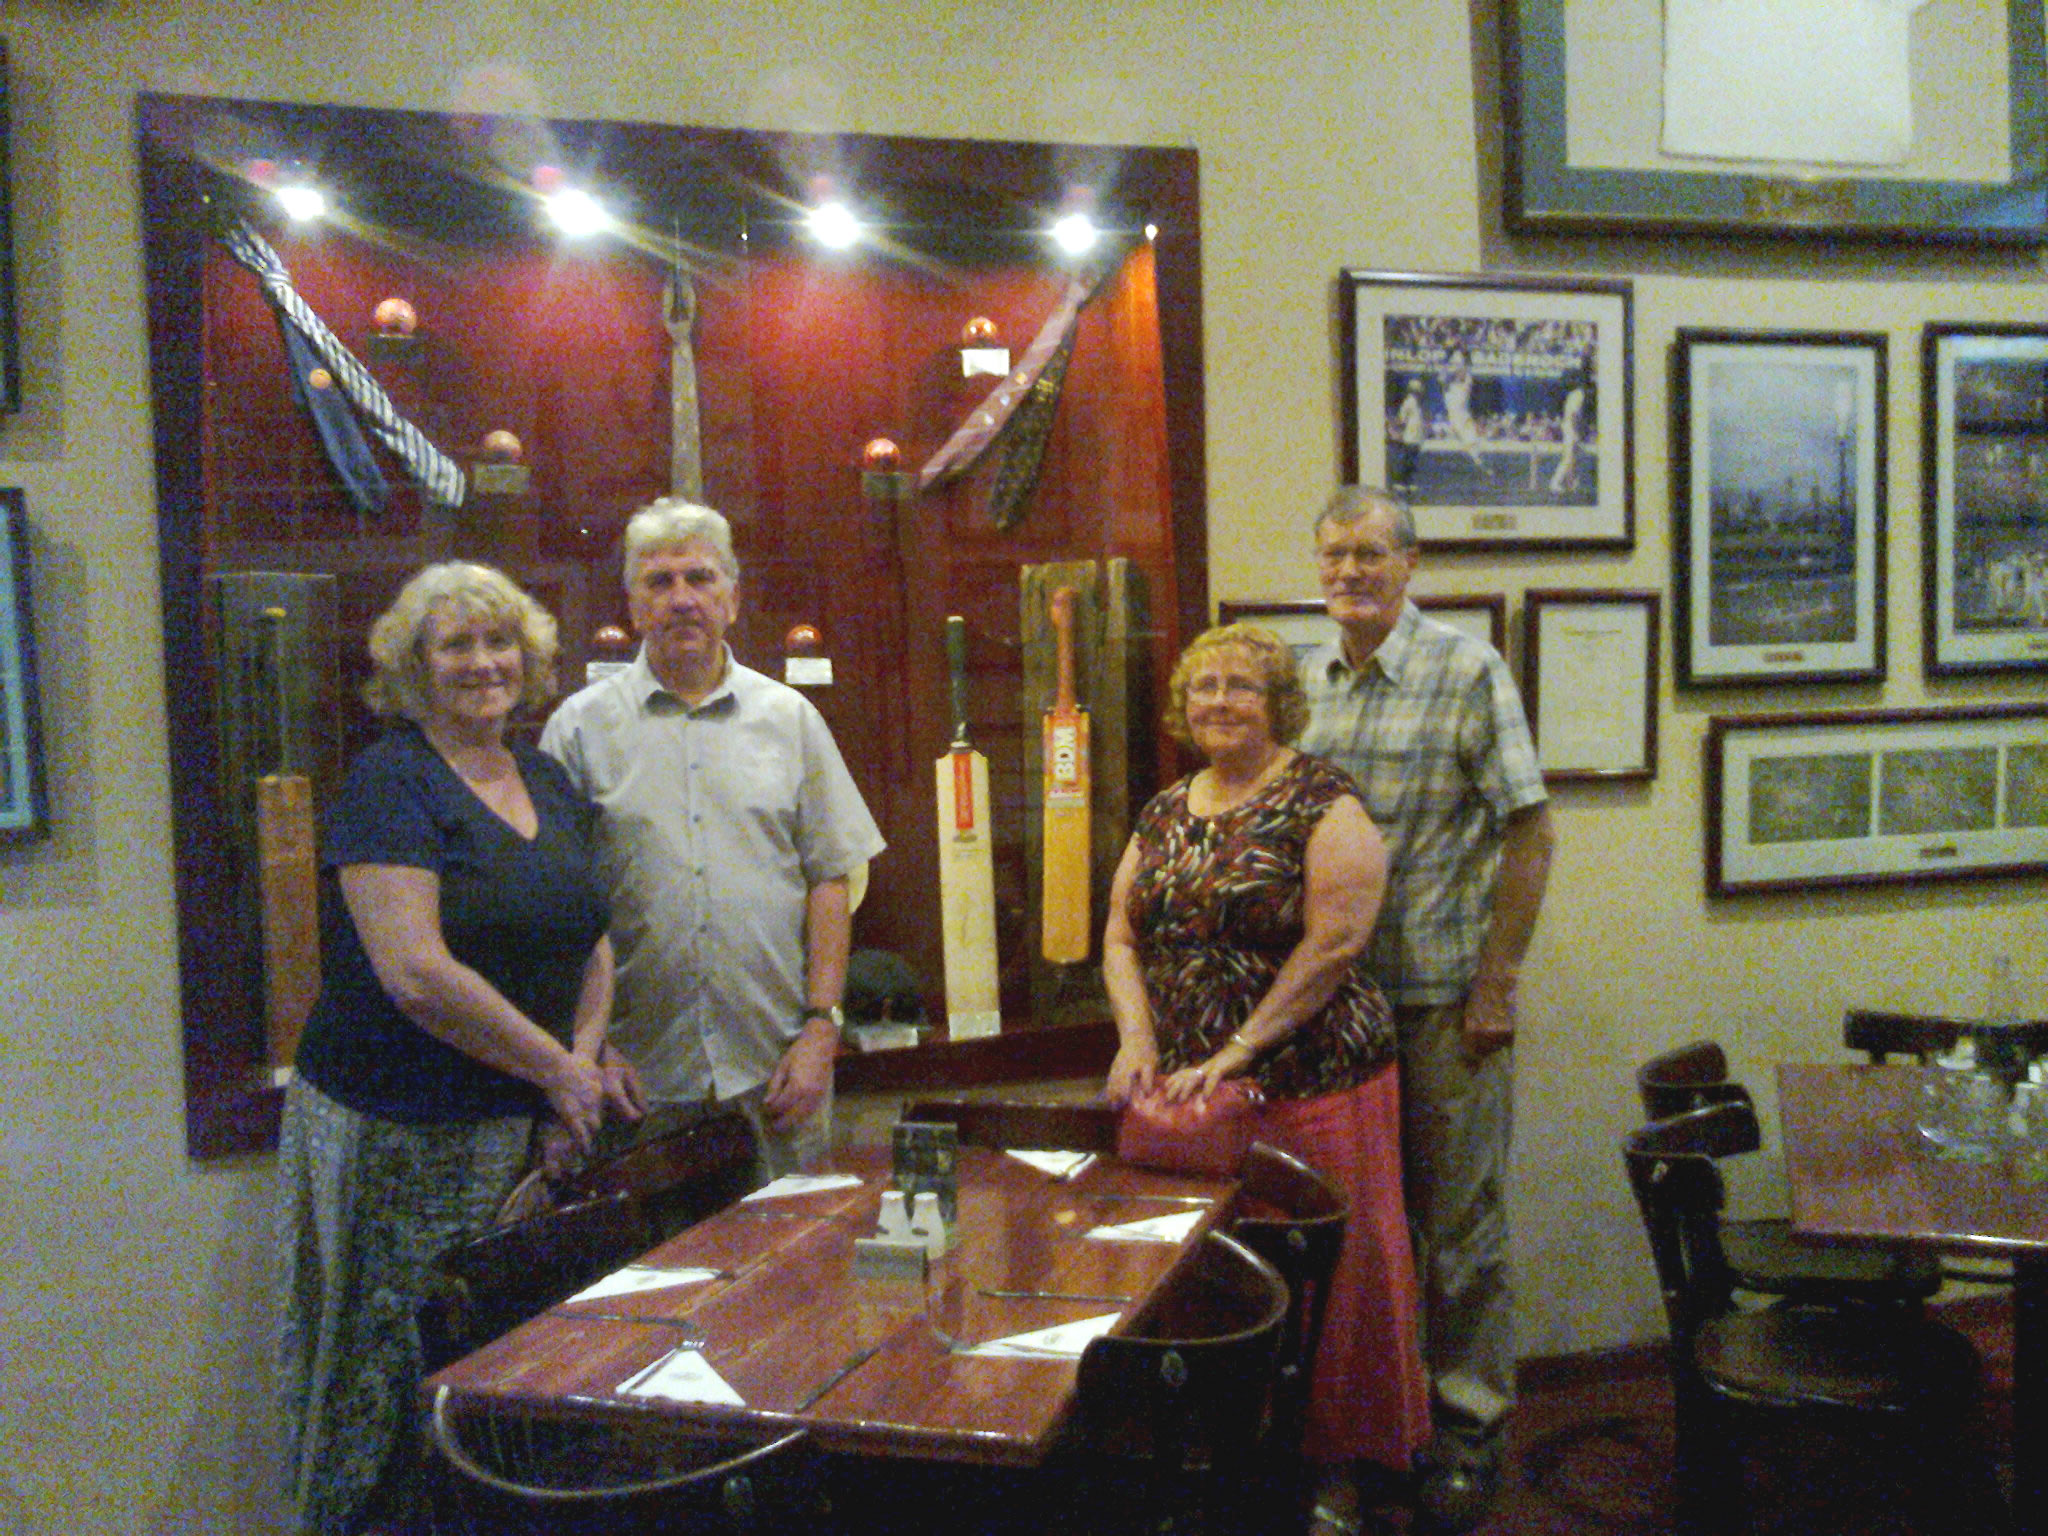 Pat & Garry and Monica and John Kirby at the Cricket Club - a specail restaurent for Criket Fans